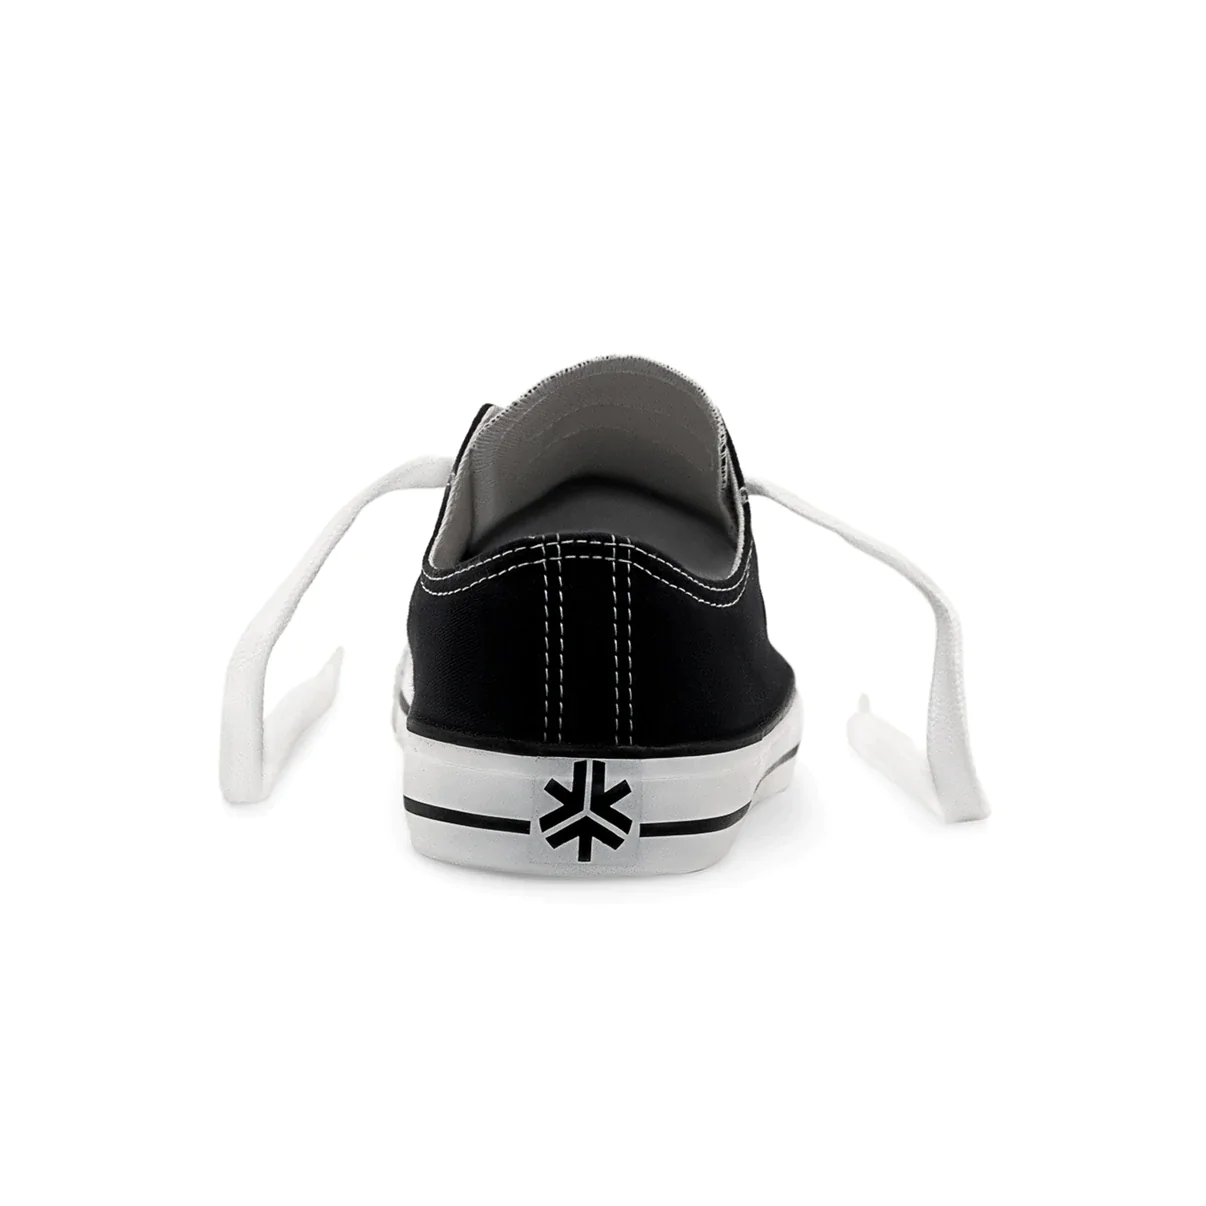 Low Cut Sneakers, Black & White CLEARANCE STOCK